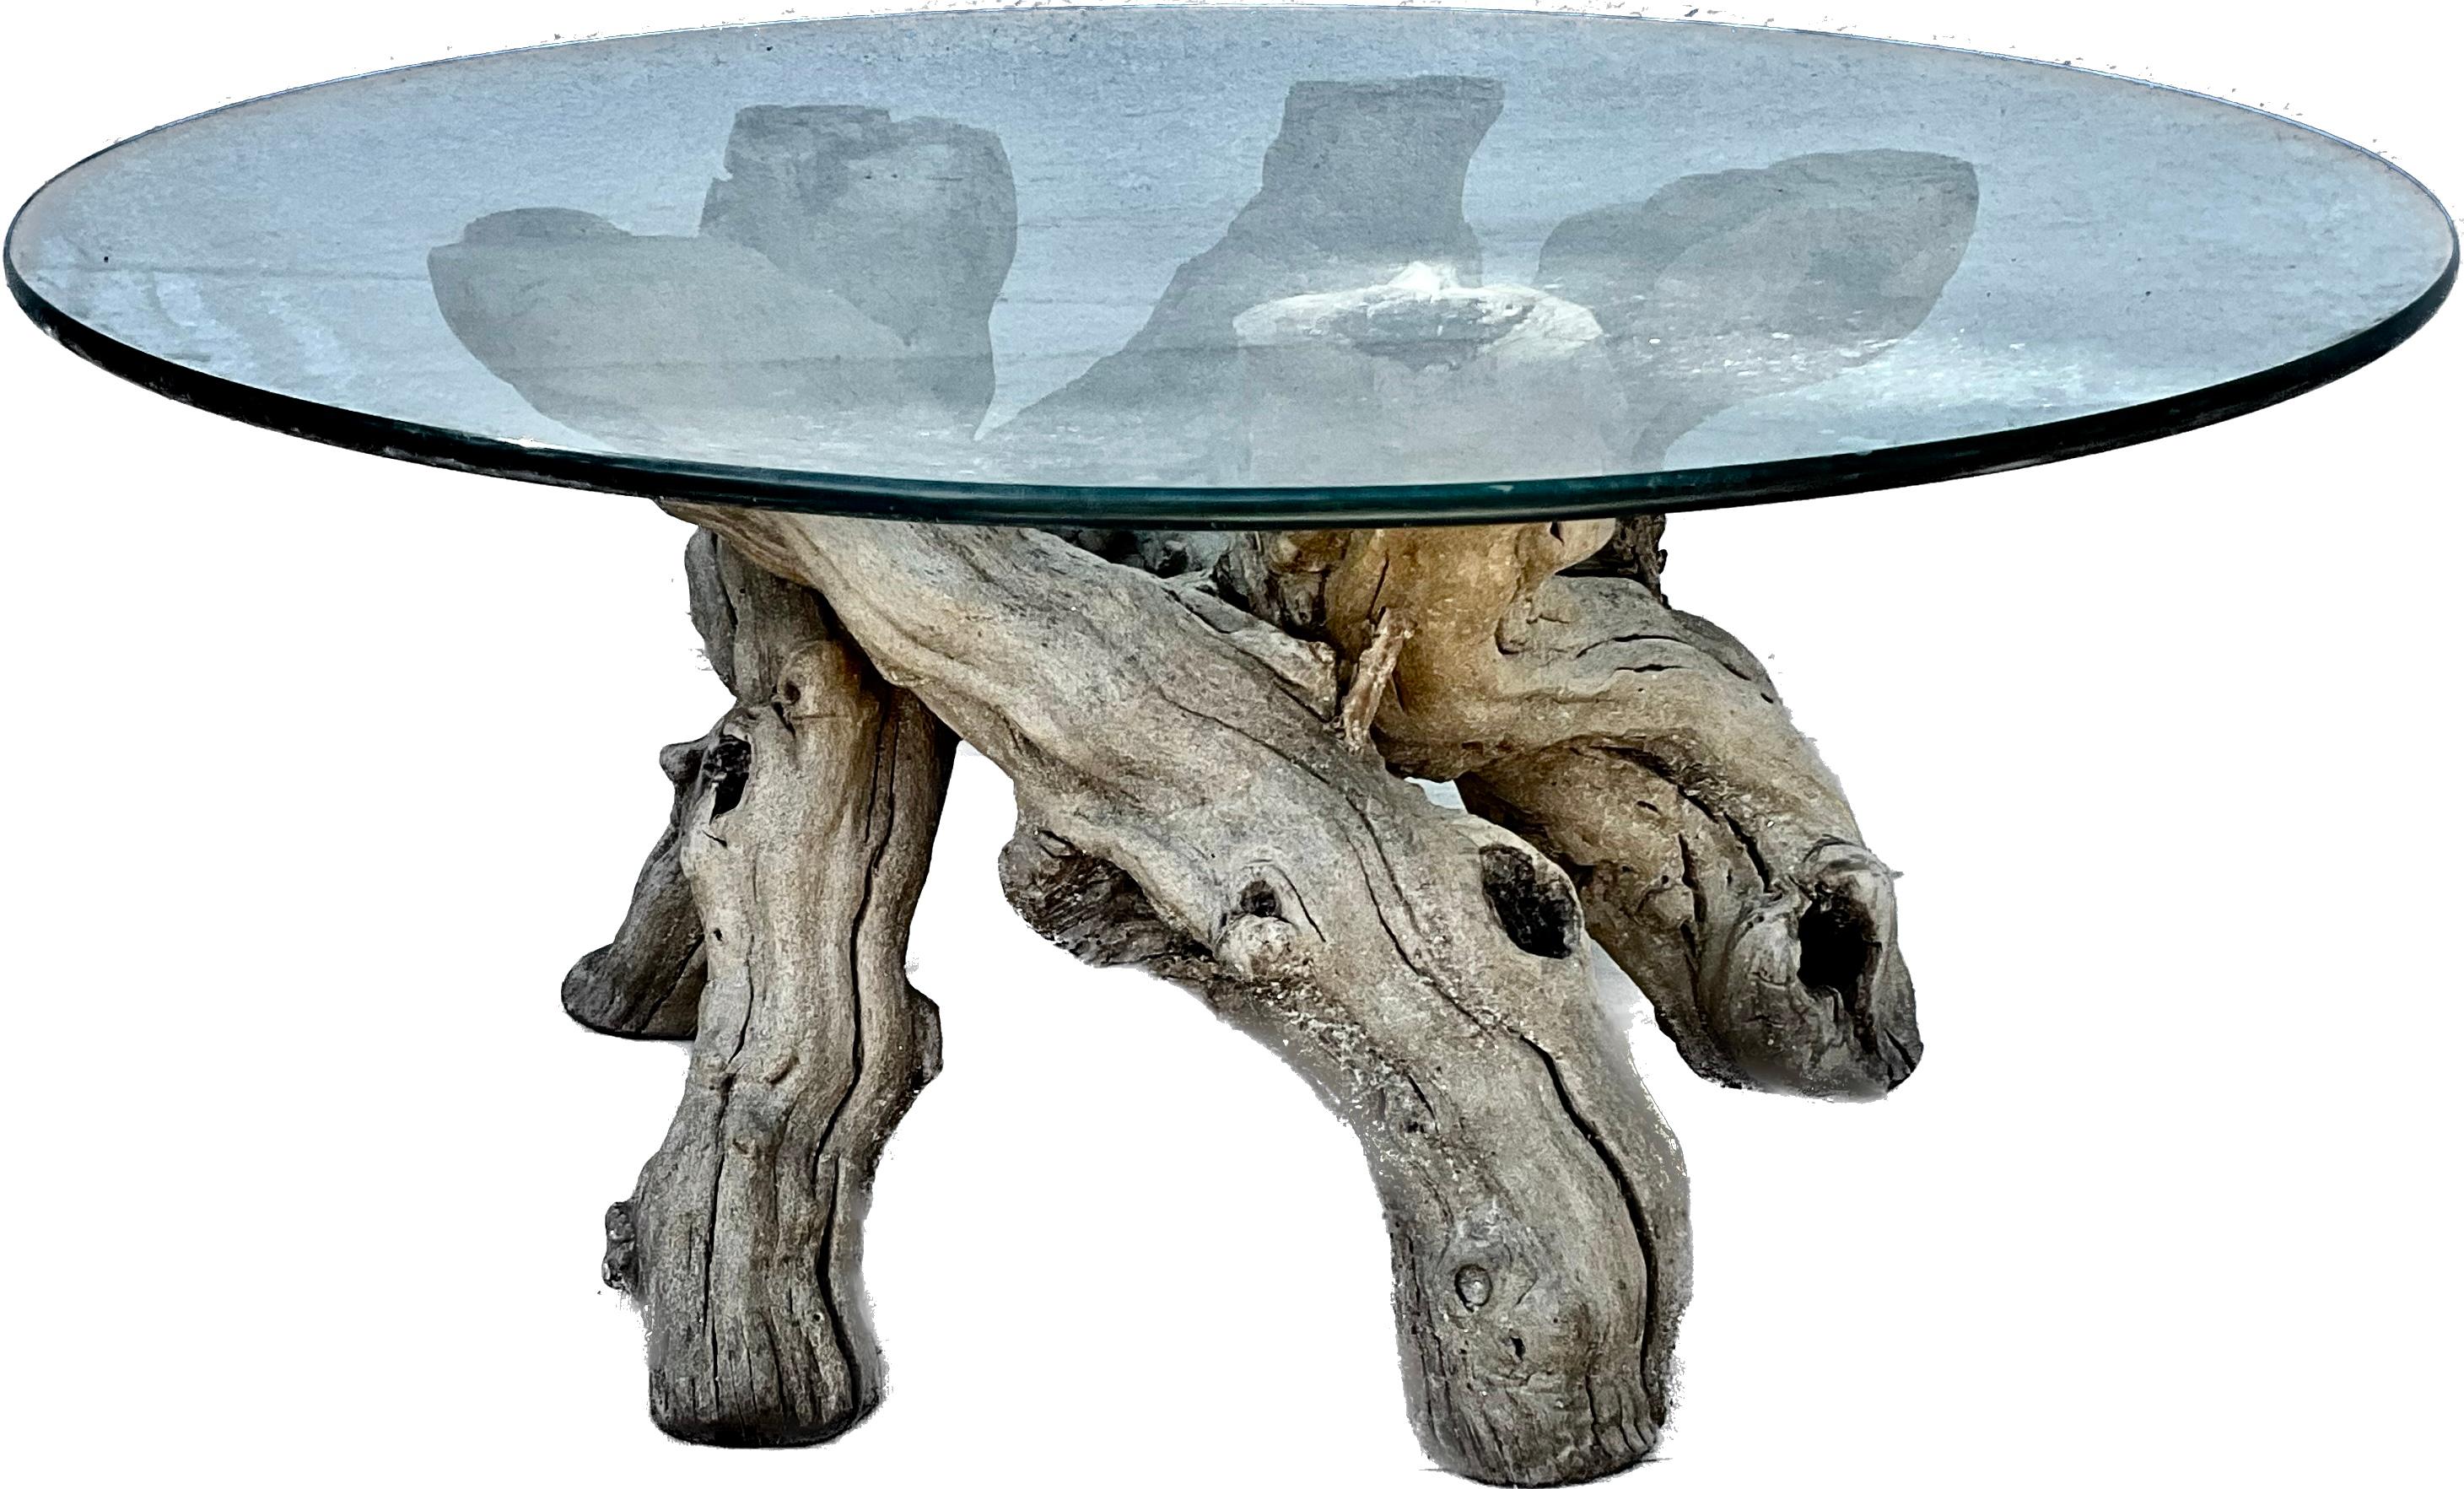 Organic Grape Vine Base Table With Round Glass Top In Good Condition For Sale In Bradenton, FL